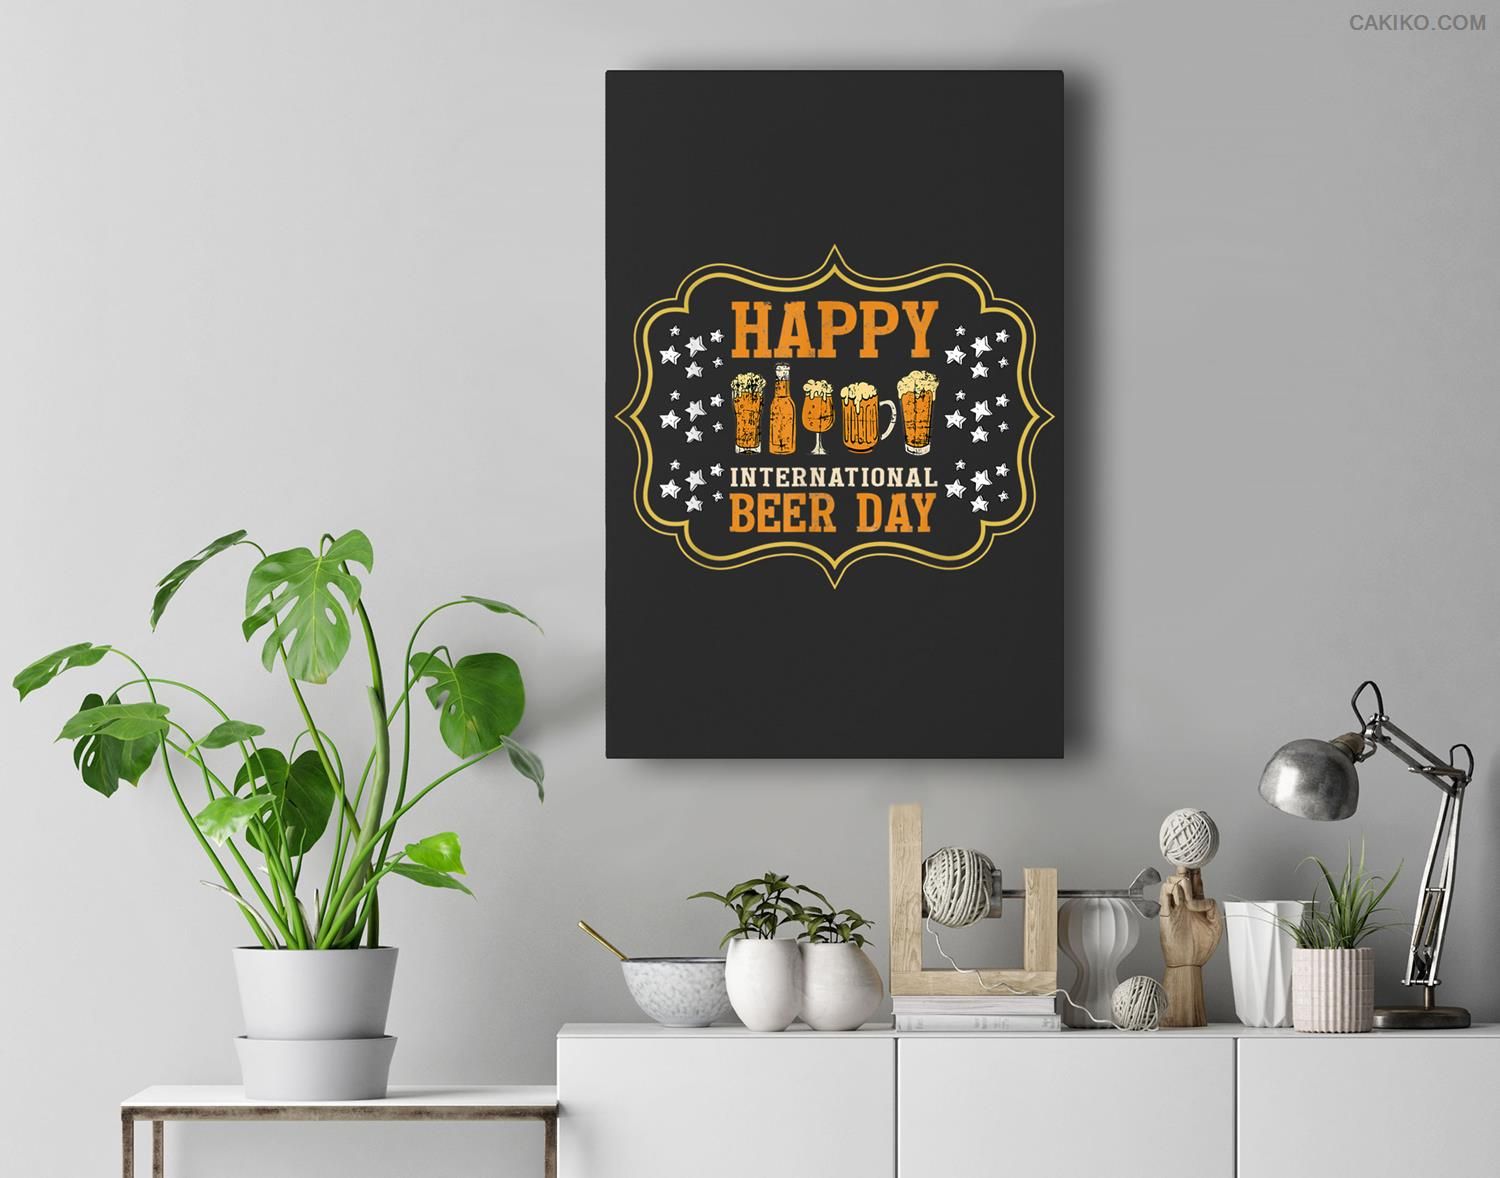 Happy International Beer Day, Funny Beer Day Premium Wall Art Canvas Decor